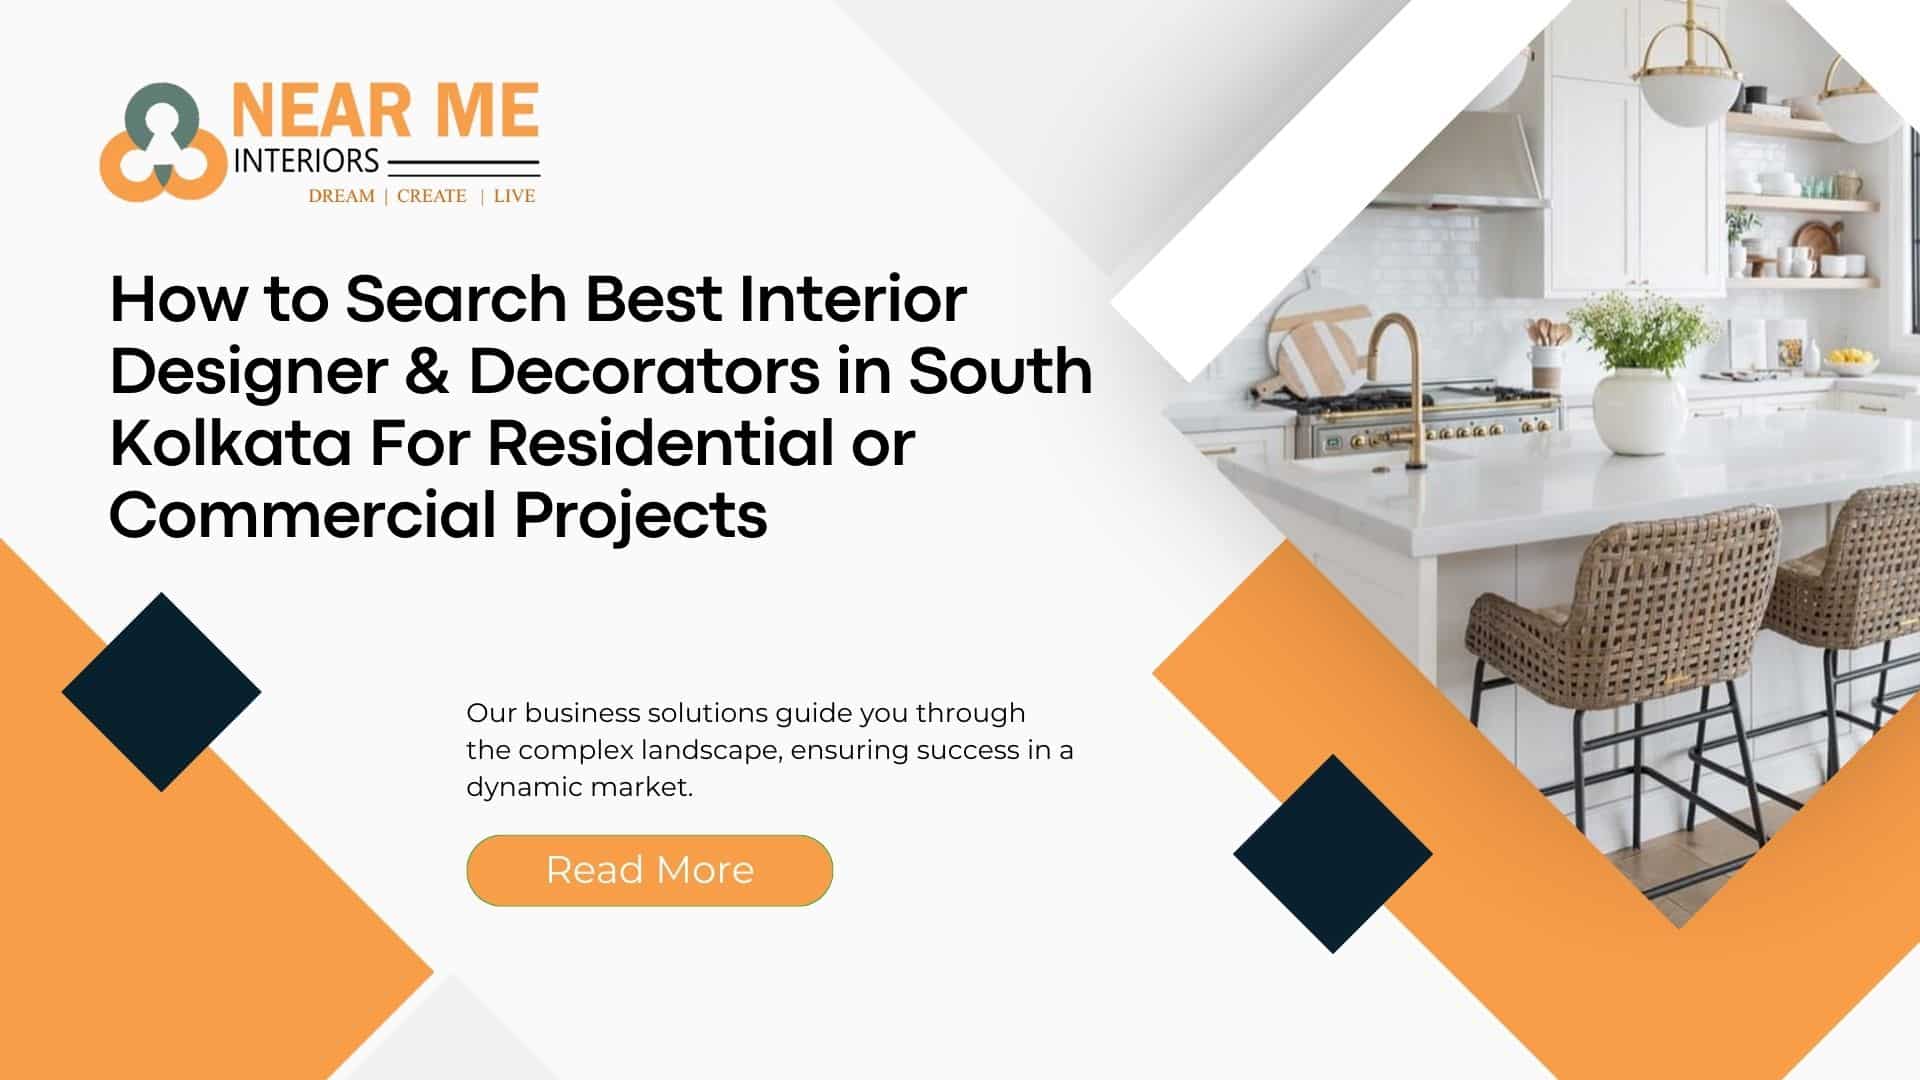 How to Search Best Interior Designer & Decorators in South Kolkata For Residential or Commercial Projects